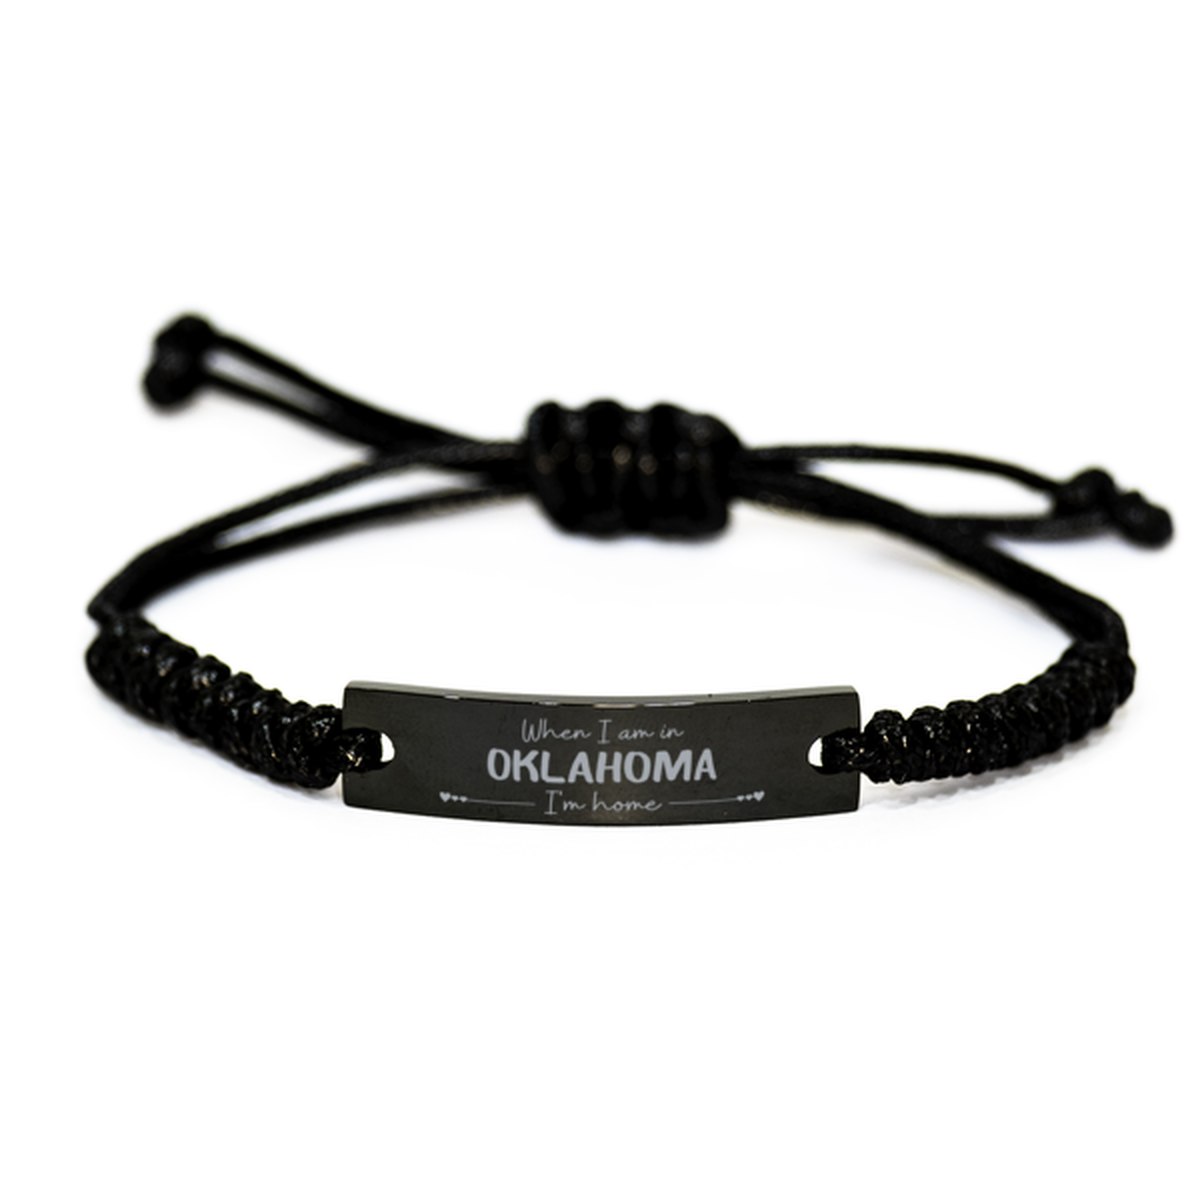 When I am in Oklahoma I'm home Black Rope Bracelet, Cheap Gifts For Oklahoma, State Oklahoma Birthday Gifts for Friends Coworker